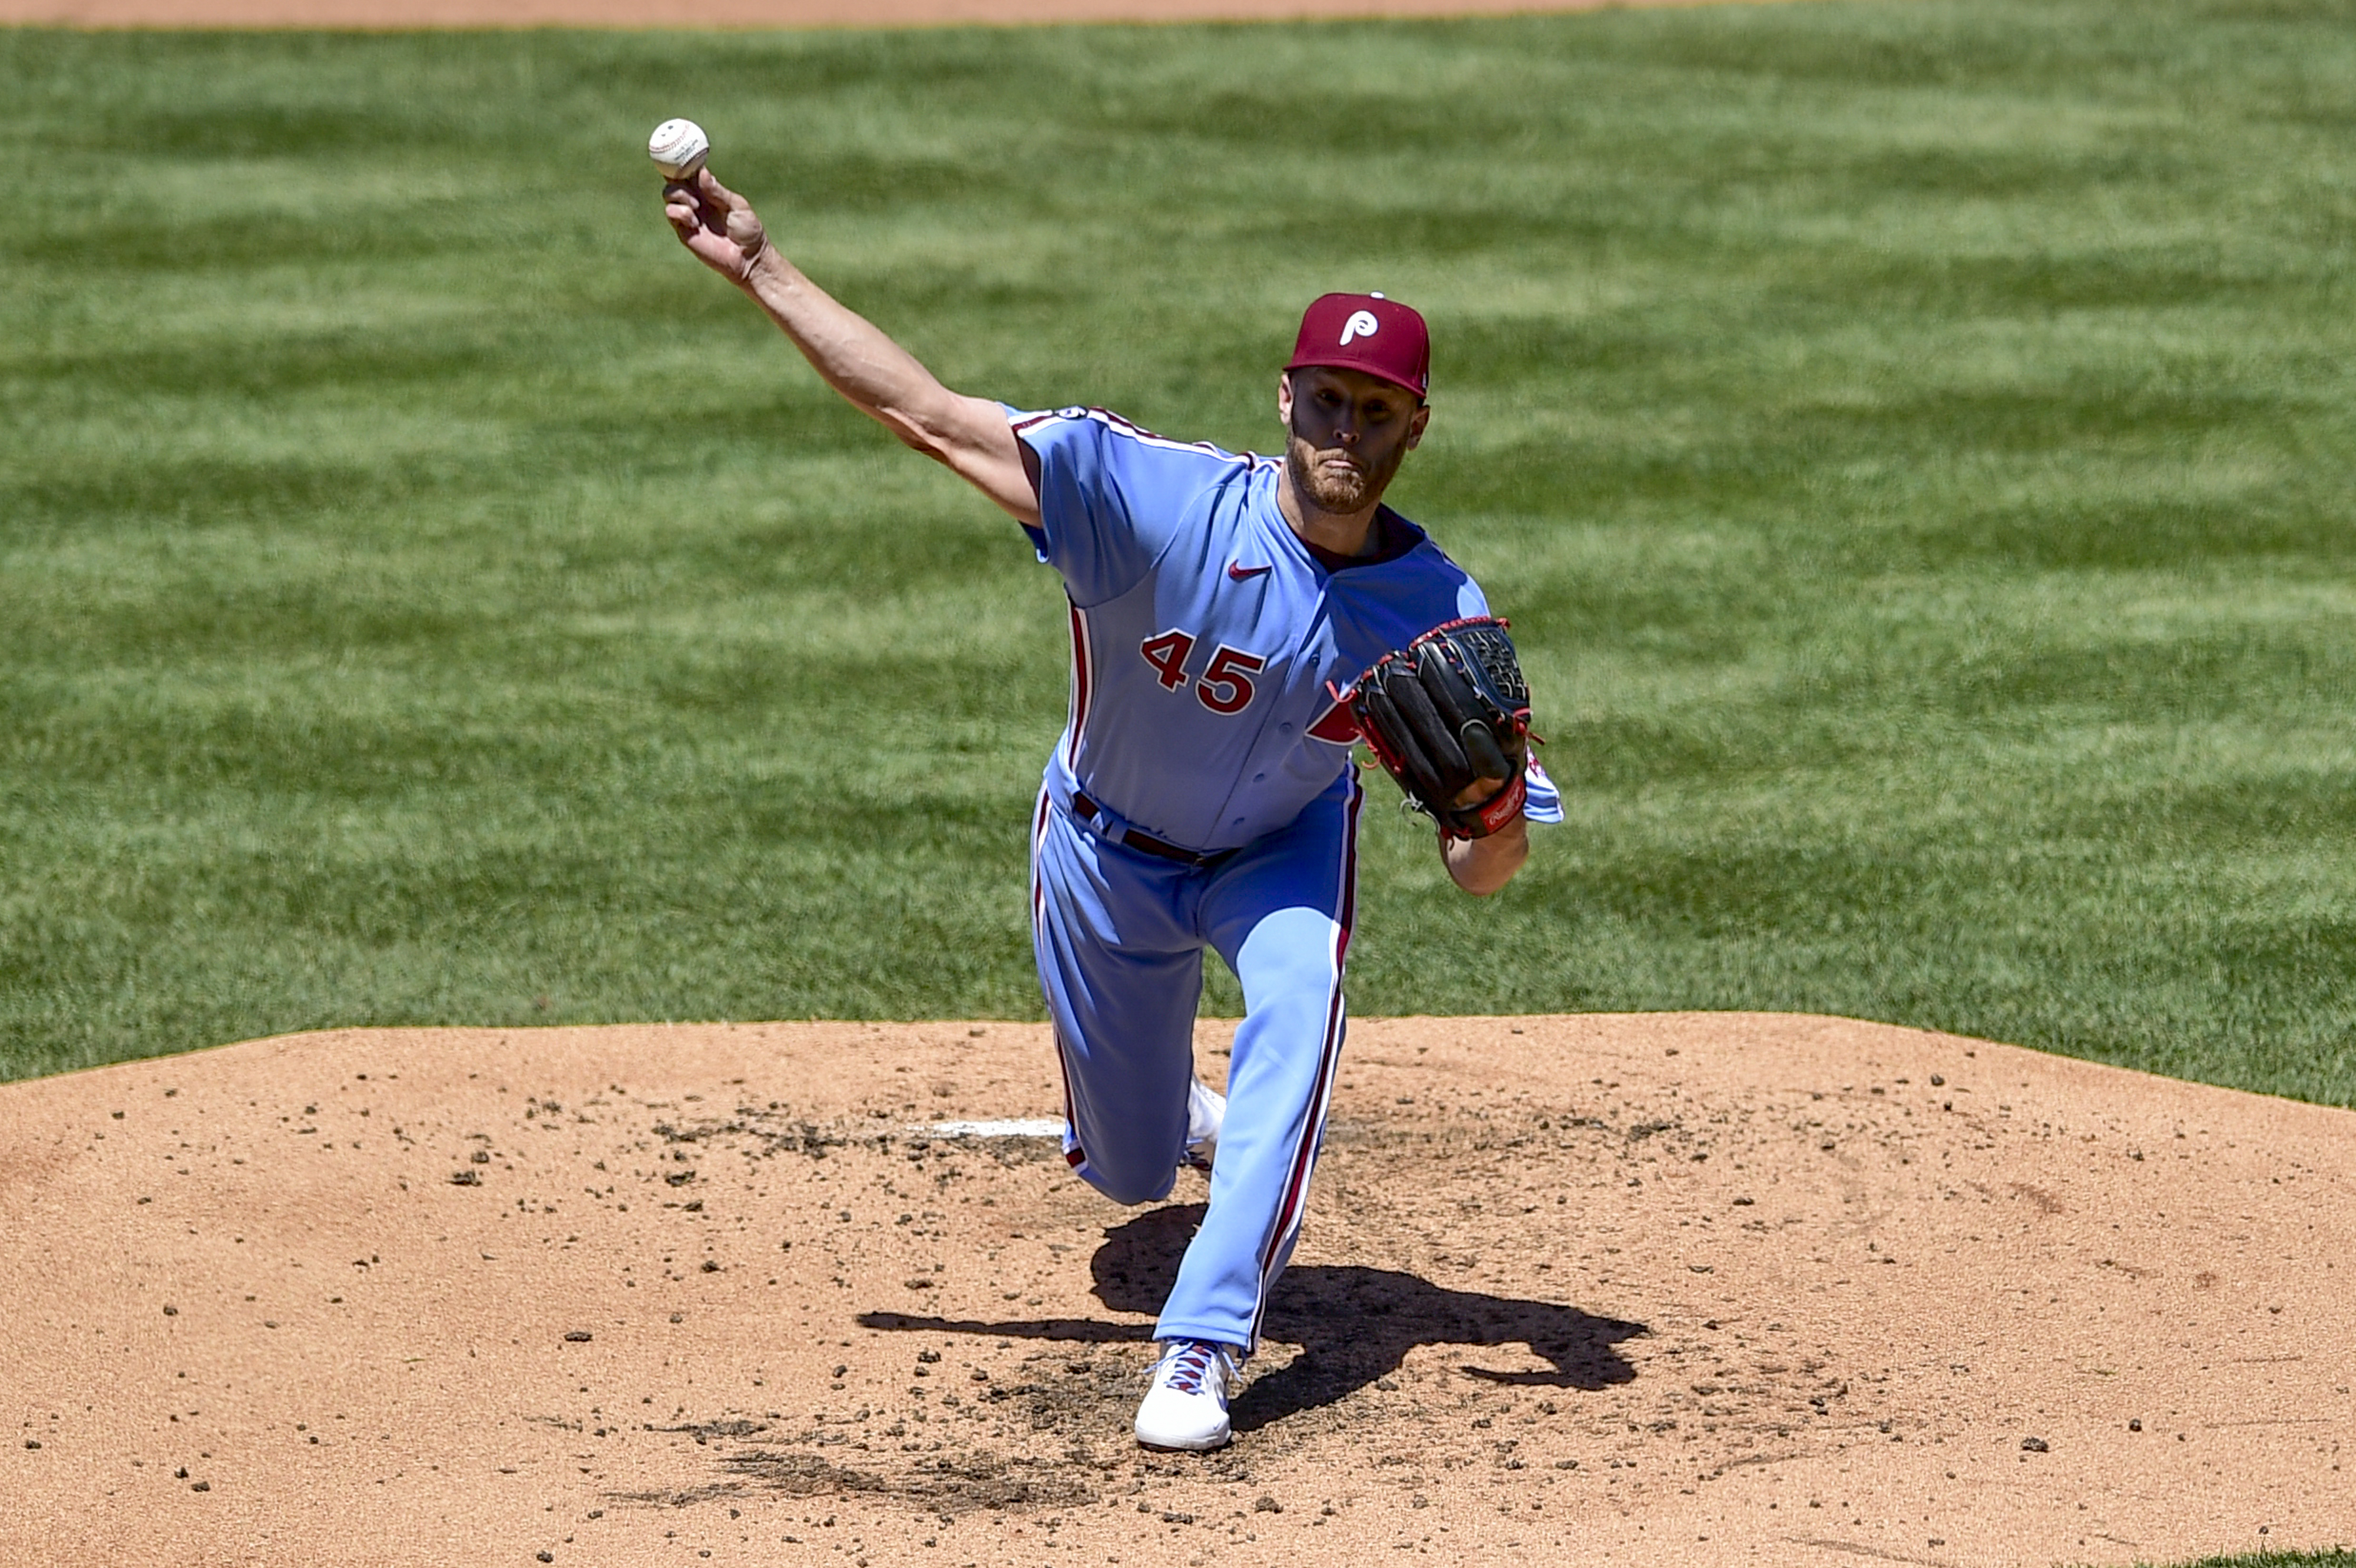 Phillies' Wheeler tosses 3-hitter, fans 8 in 2-0 victory